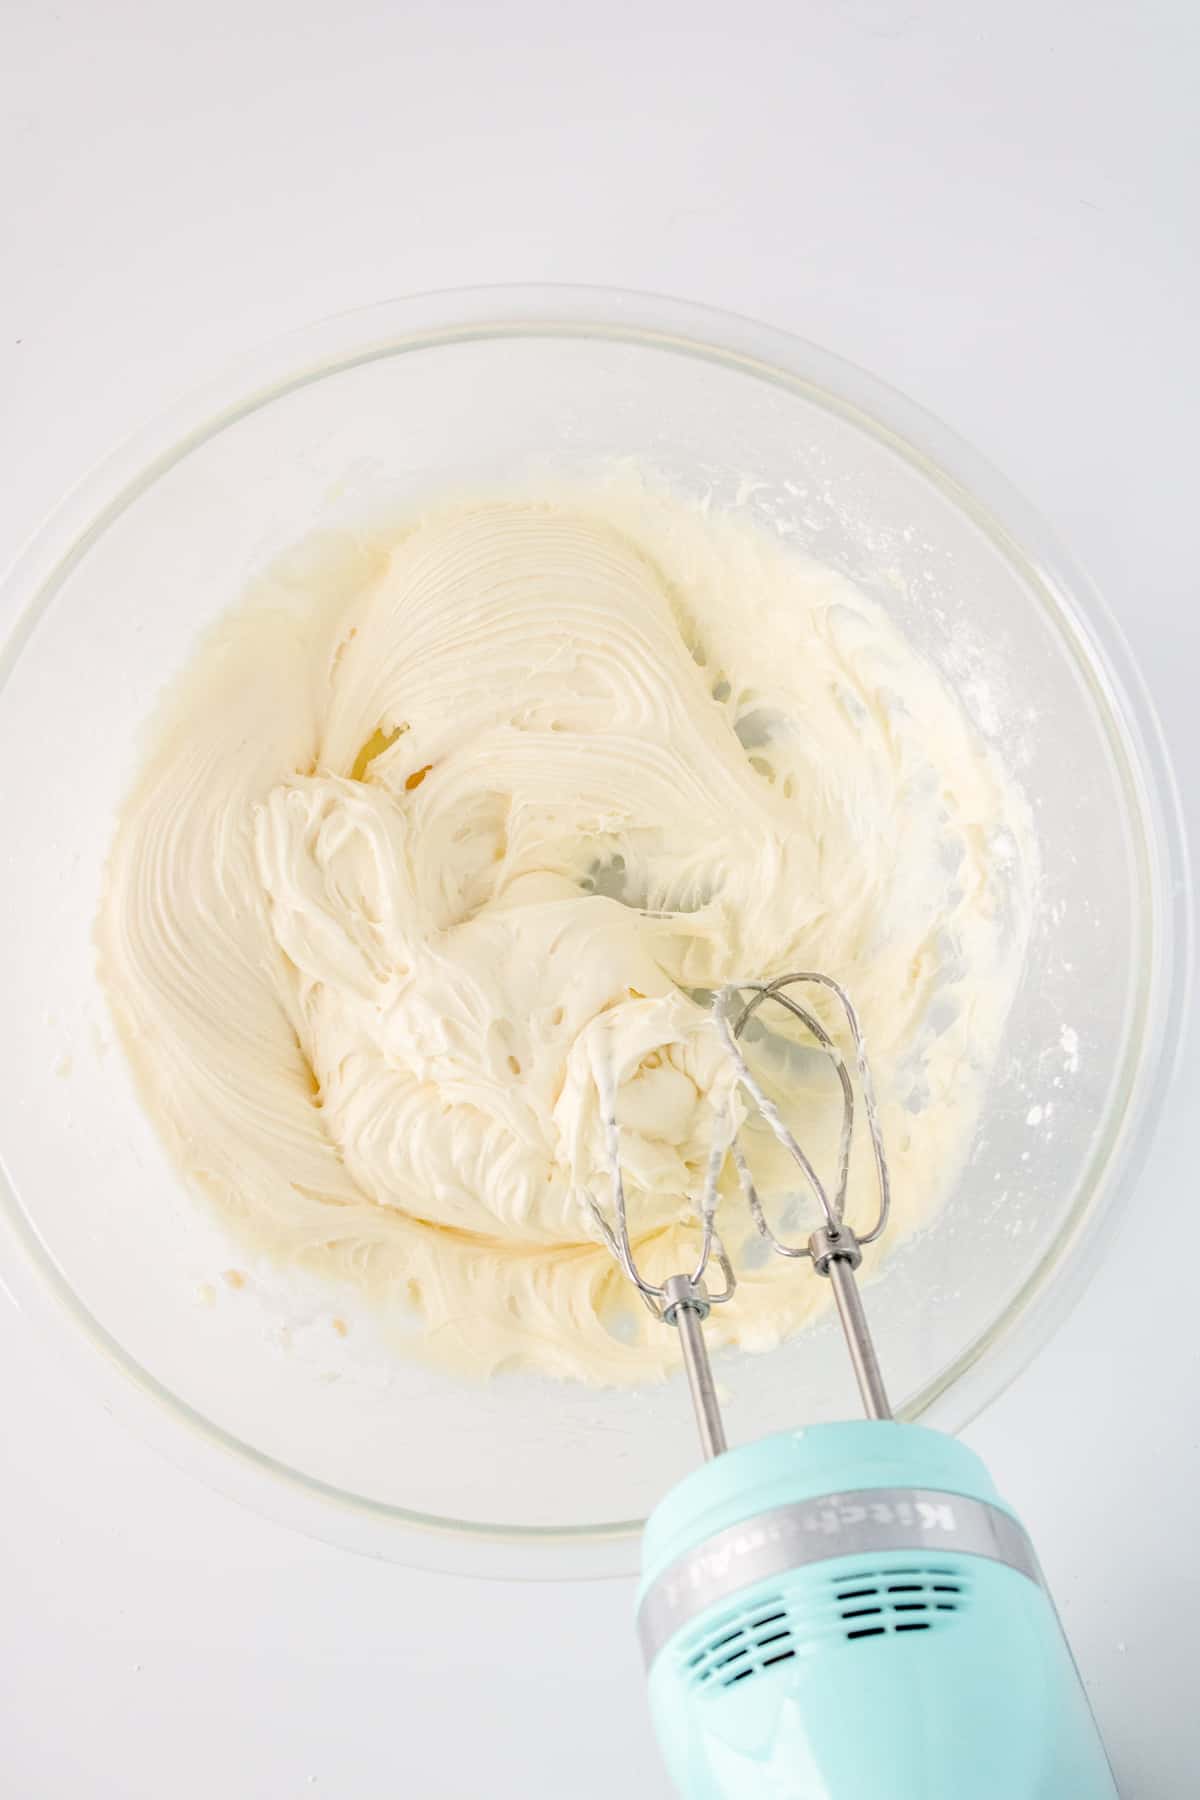 cream cheese filling being whipped in glass bowl with a hand mixer